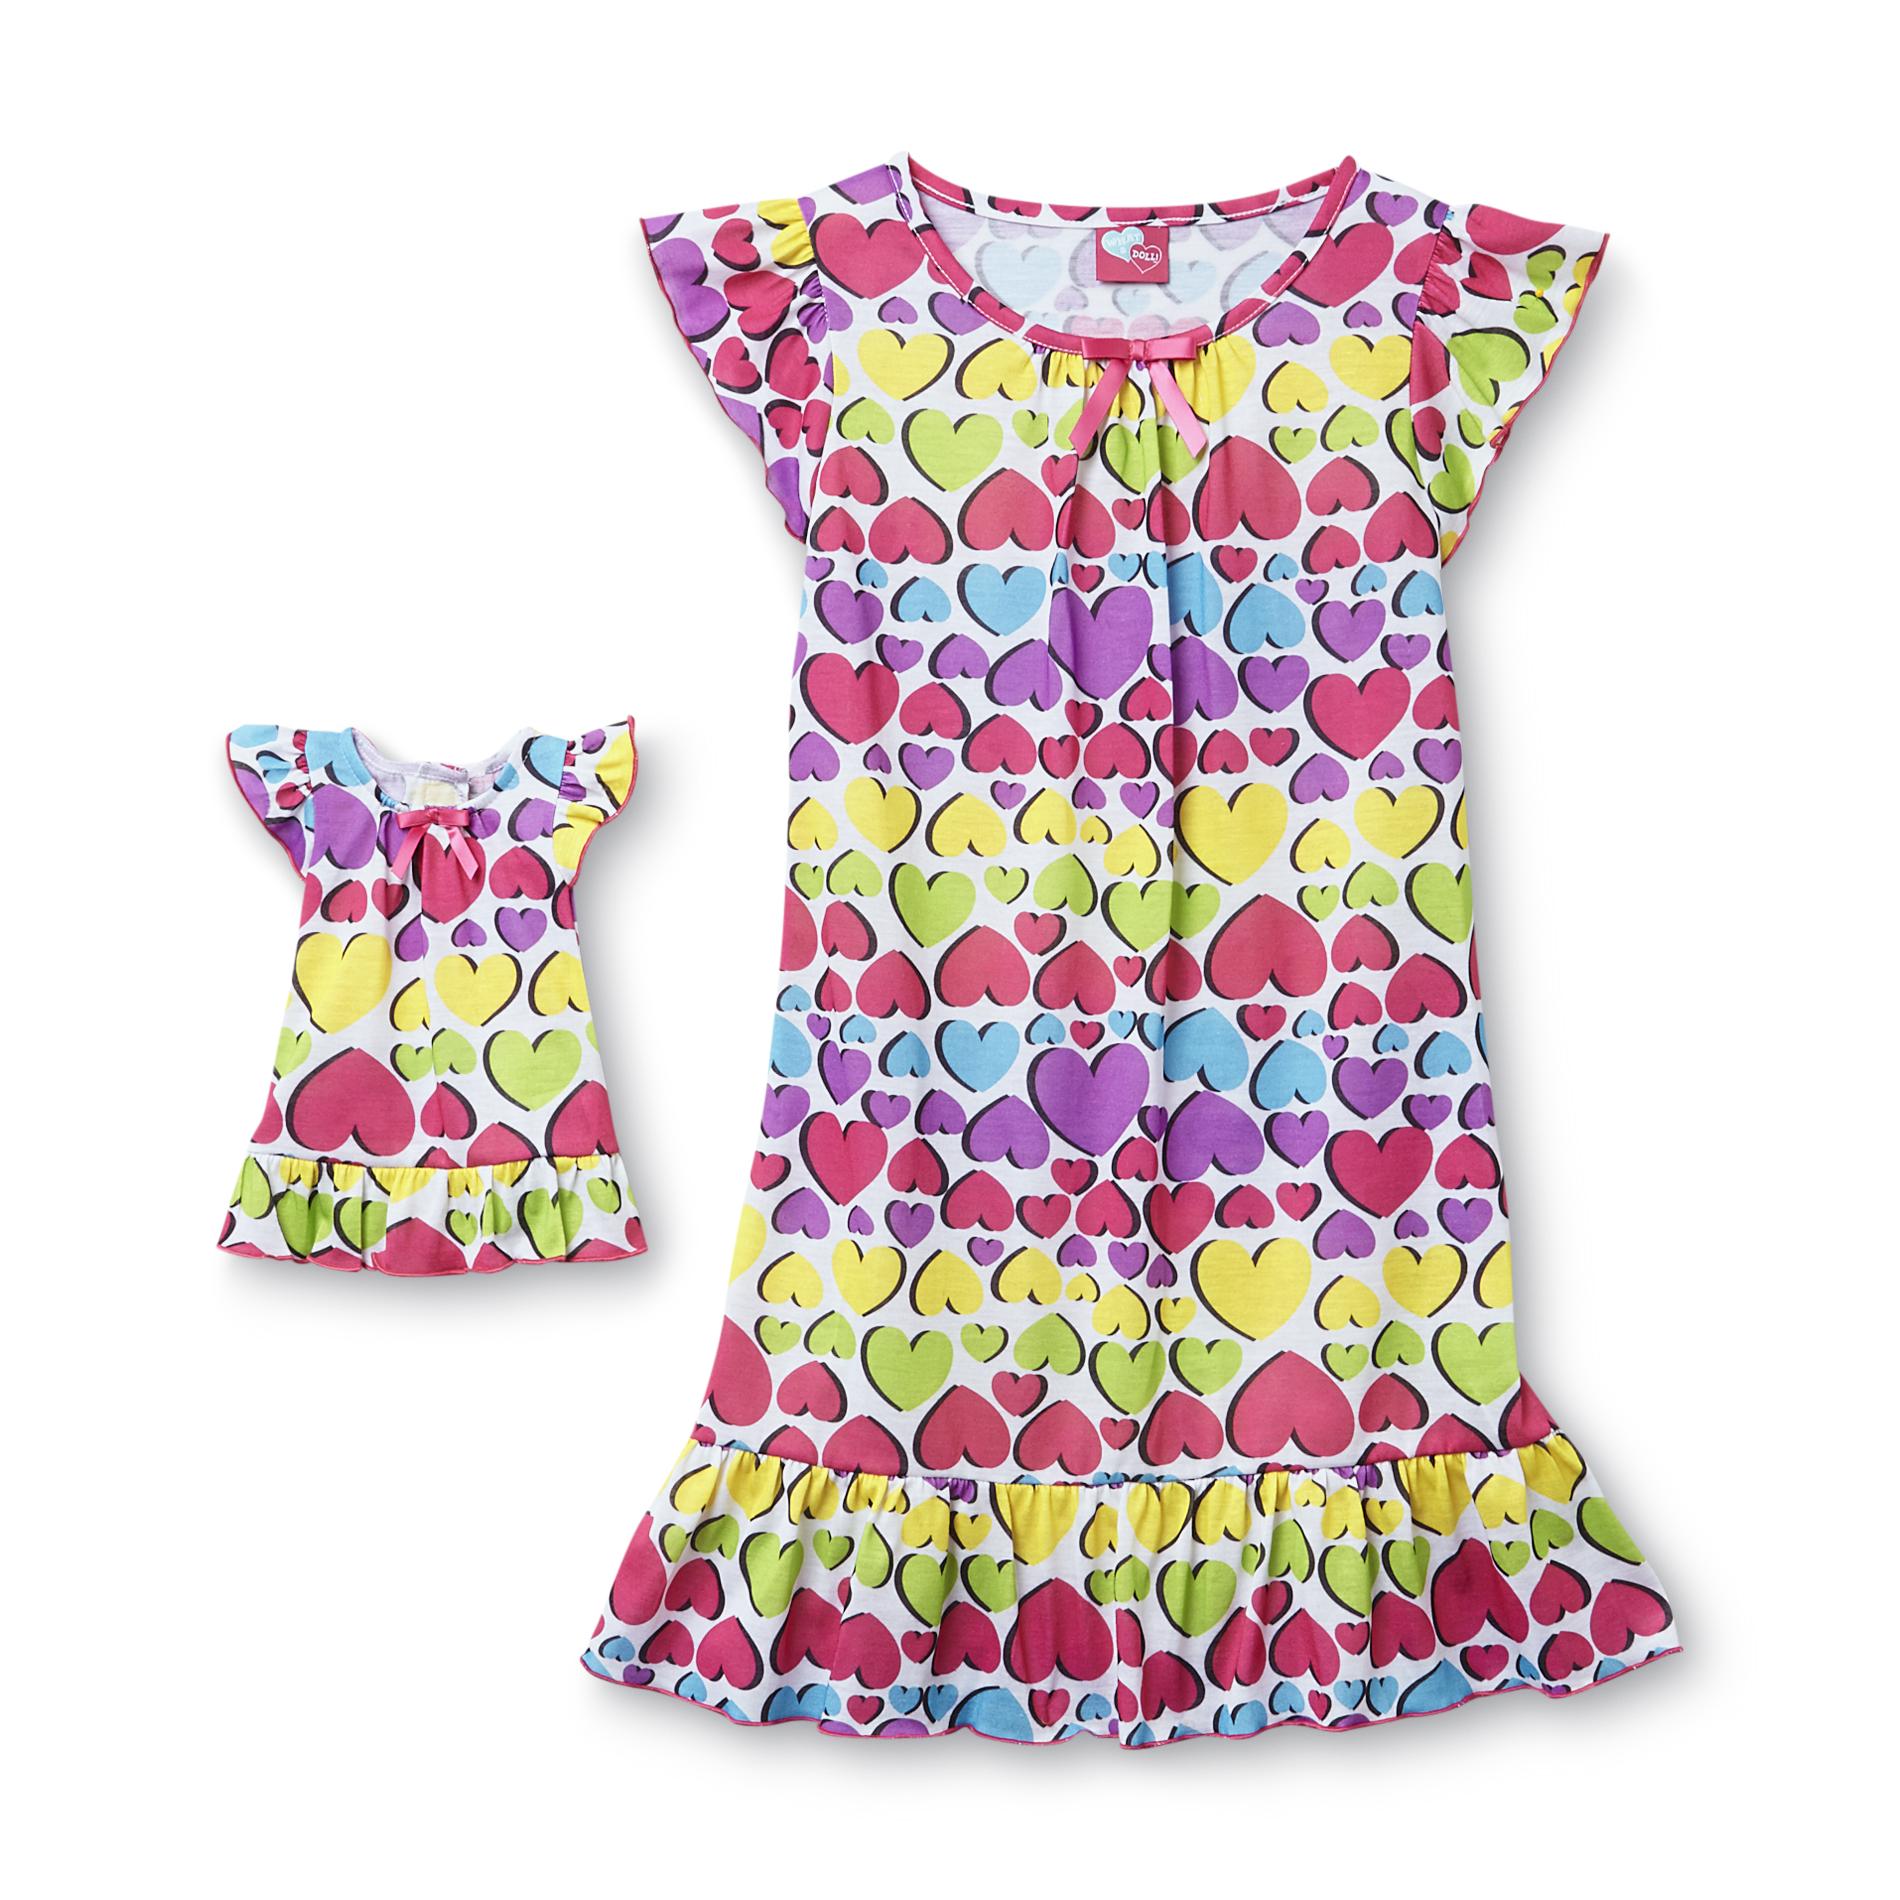 What A Doll Girl's Nightgown & Doll Outfit - Rainbow Hearts